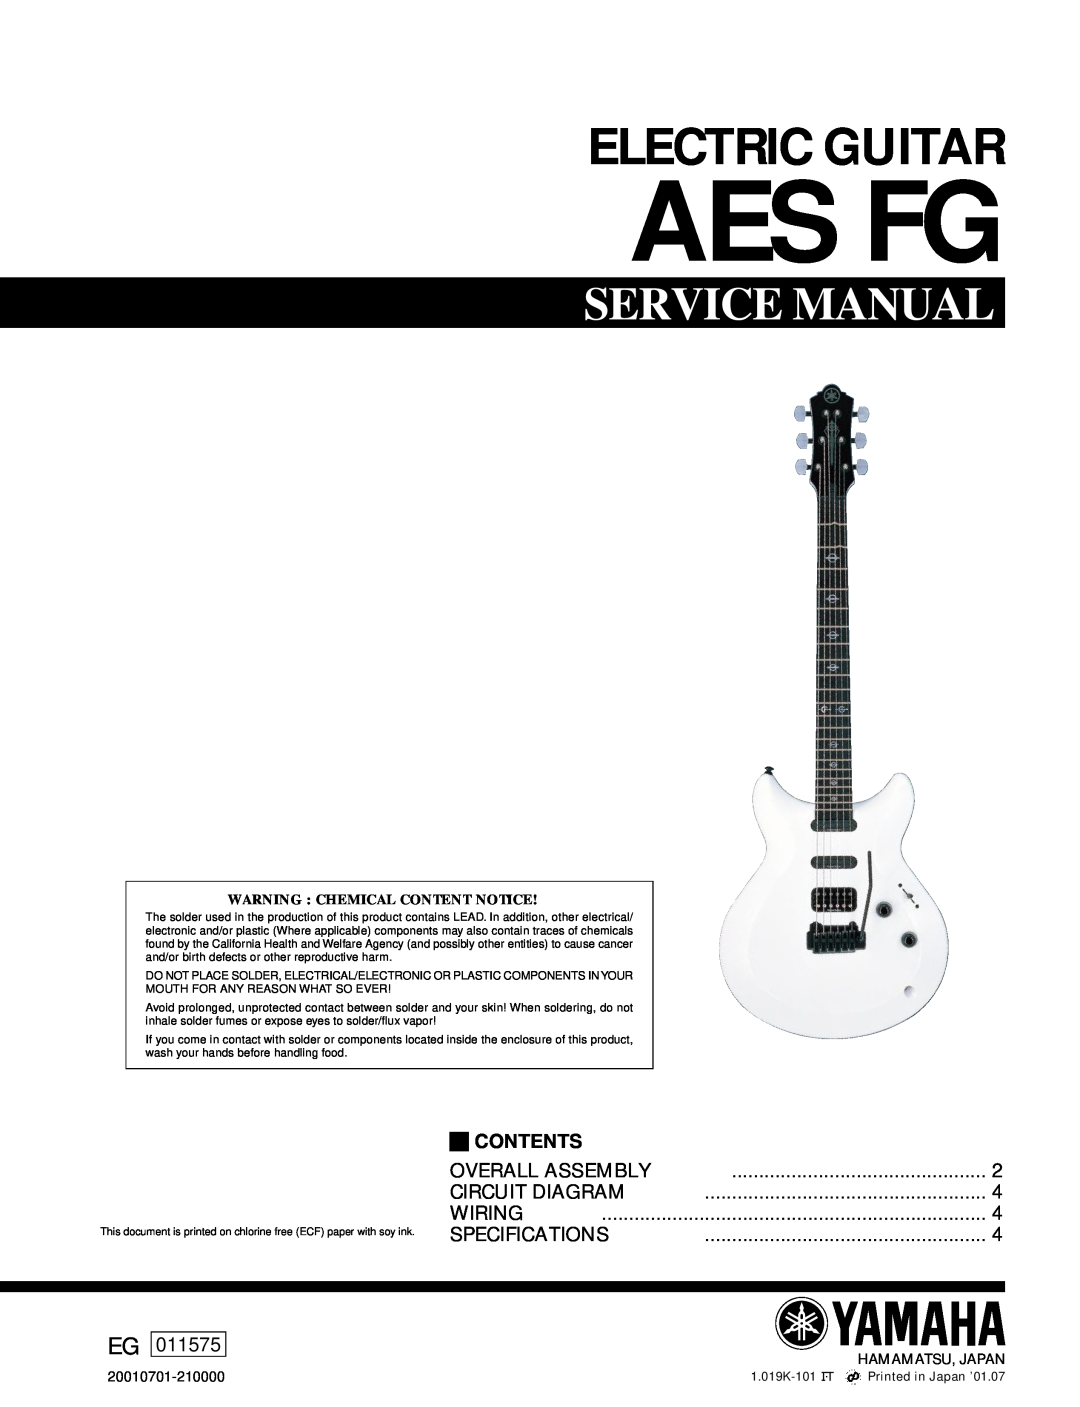 Yamaha 11575 service manual Aes Fg, Electric Guitar, Service Manual, Contents, Overall Assembly, Circuit Diagram, Wiring 